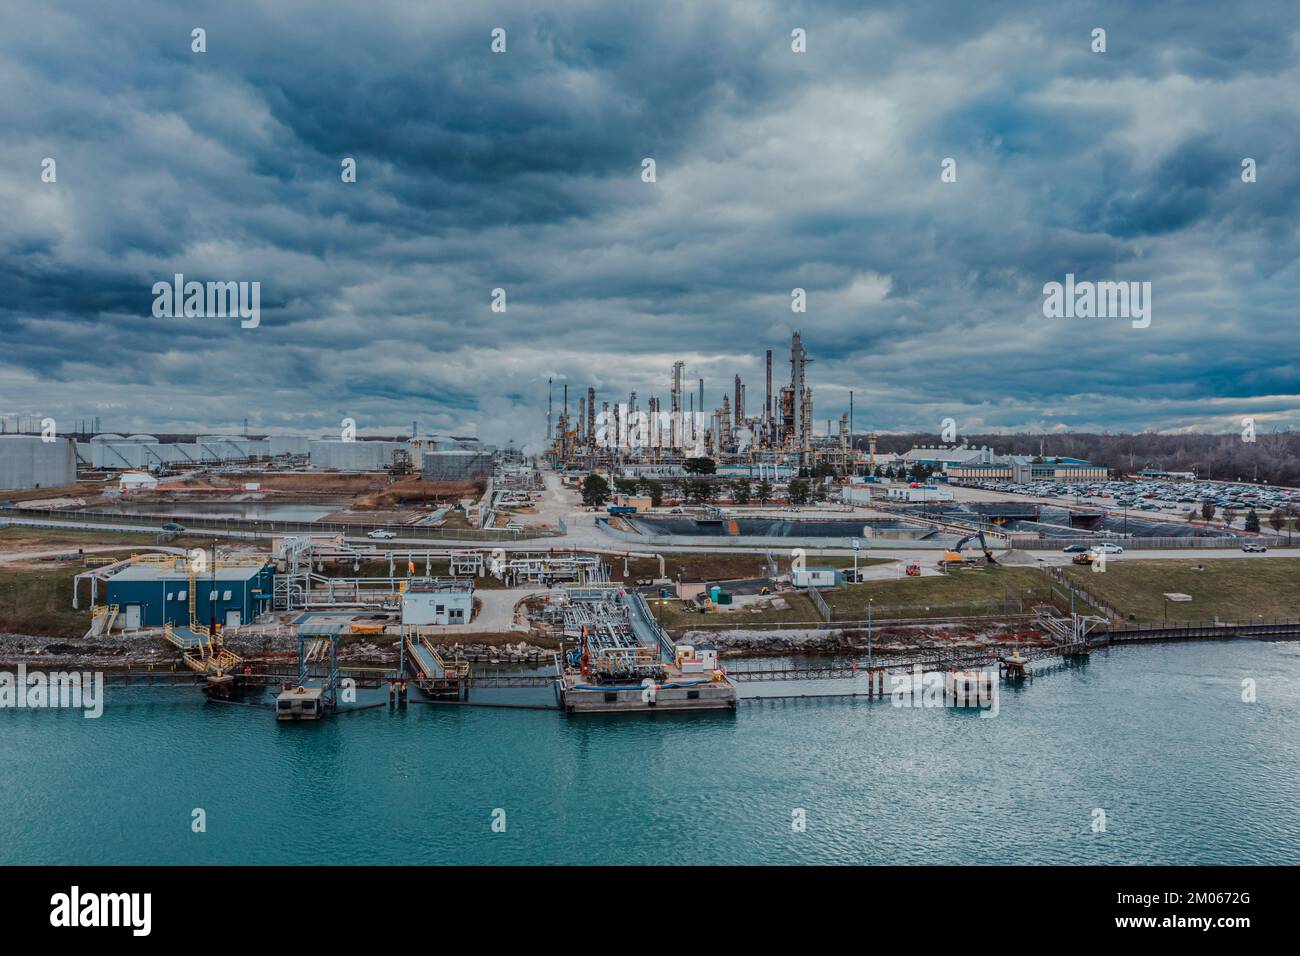 Canada's Suncor Sarina Petrol Refinery on the St. Clair River in the Great Lakes Region of the US Stock Photo